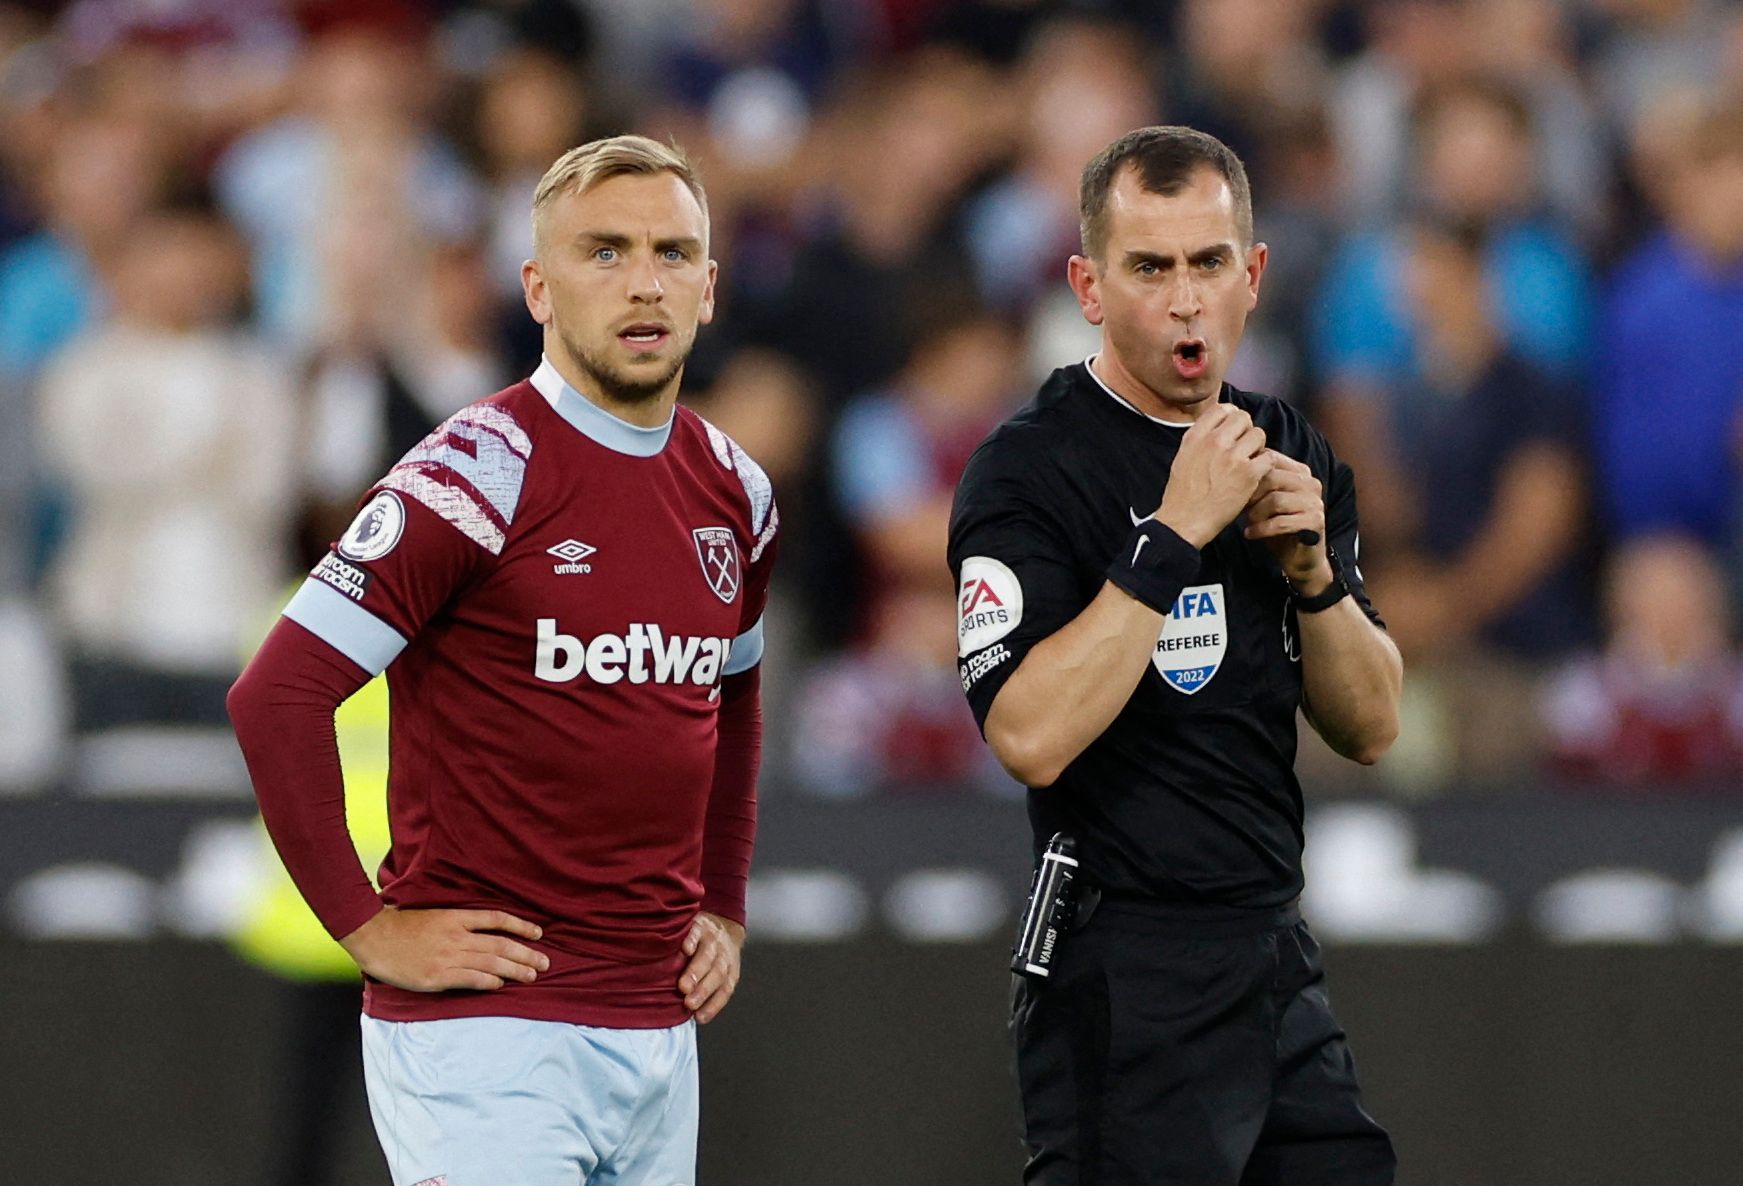 Soccer Football - Premier League - West Ham United v Tottenham Hotspur - London Stadium, London, Britain - August 31, 2022 West Ham United's Jarrod Bowen and referee Peter Bankes before the match Action Images via Reuters/John Sibley EDITORIAL USE ONLY. No use with unauthorized audio, video, data, fixture lists, club/league logos or 'live' services. Online in-match use limited to 75 images, no video emulation. No use in betting, games or single club /league/player publications.  Please contact y